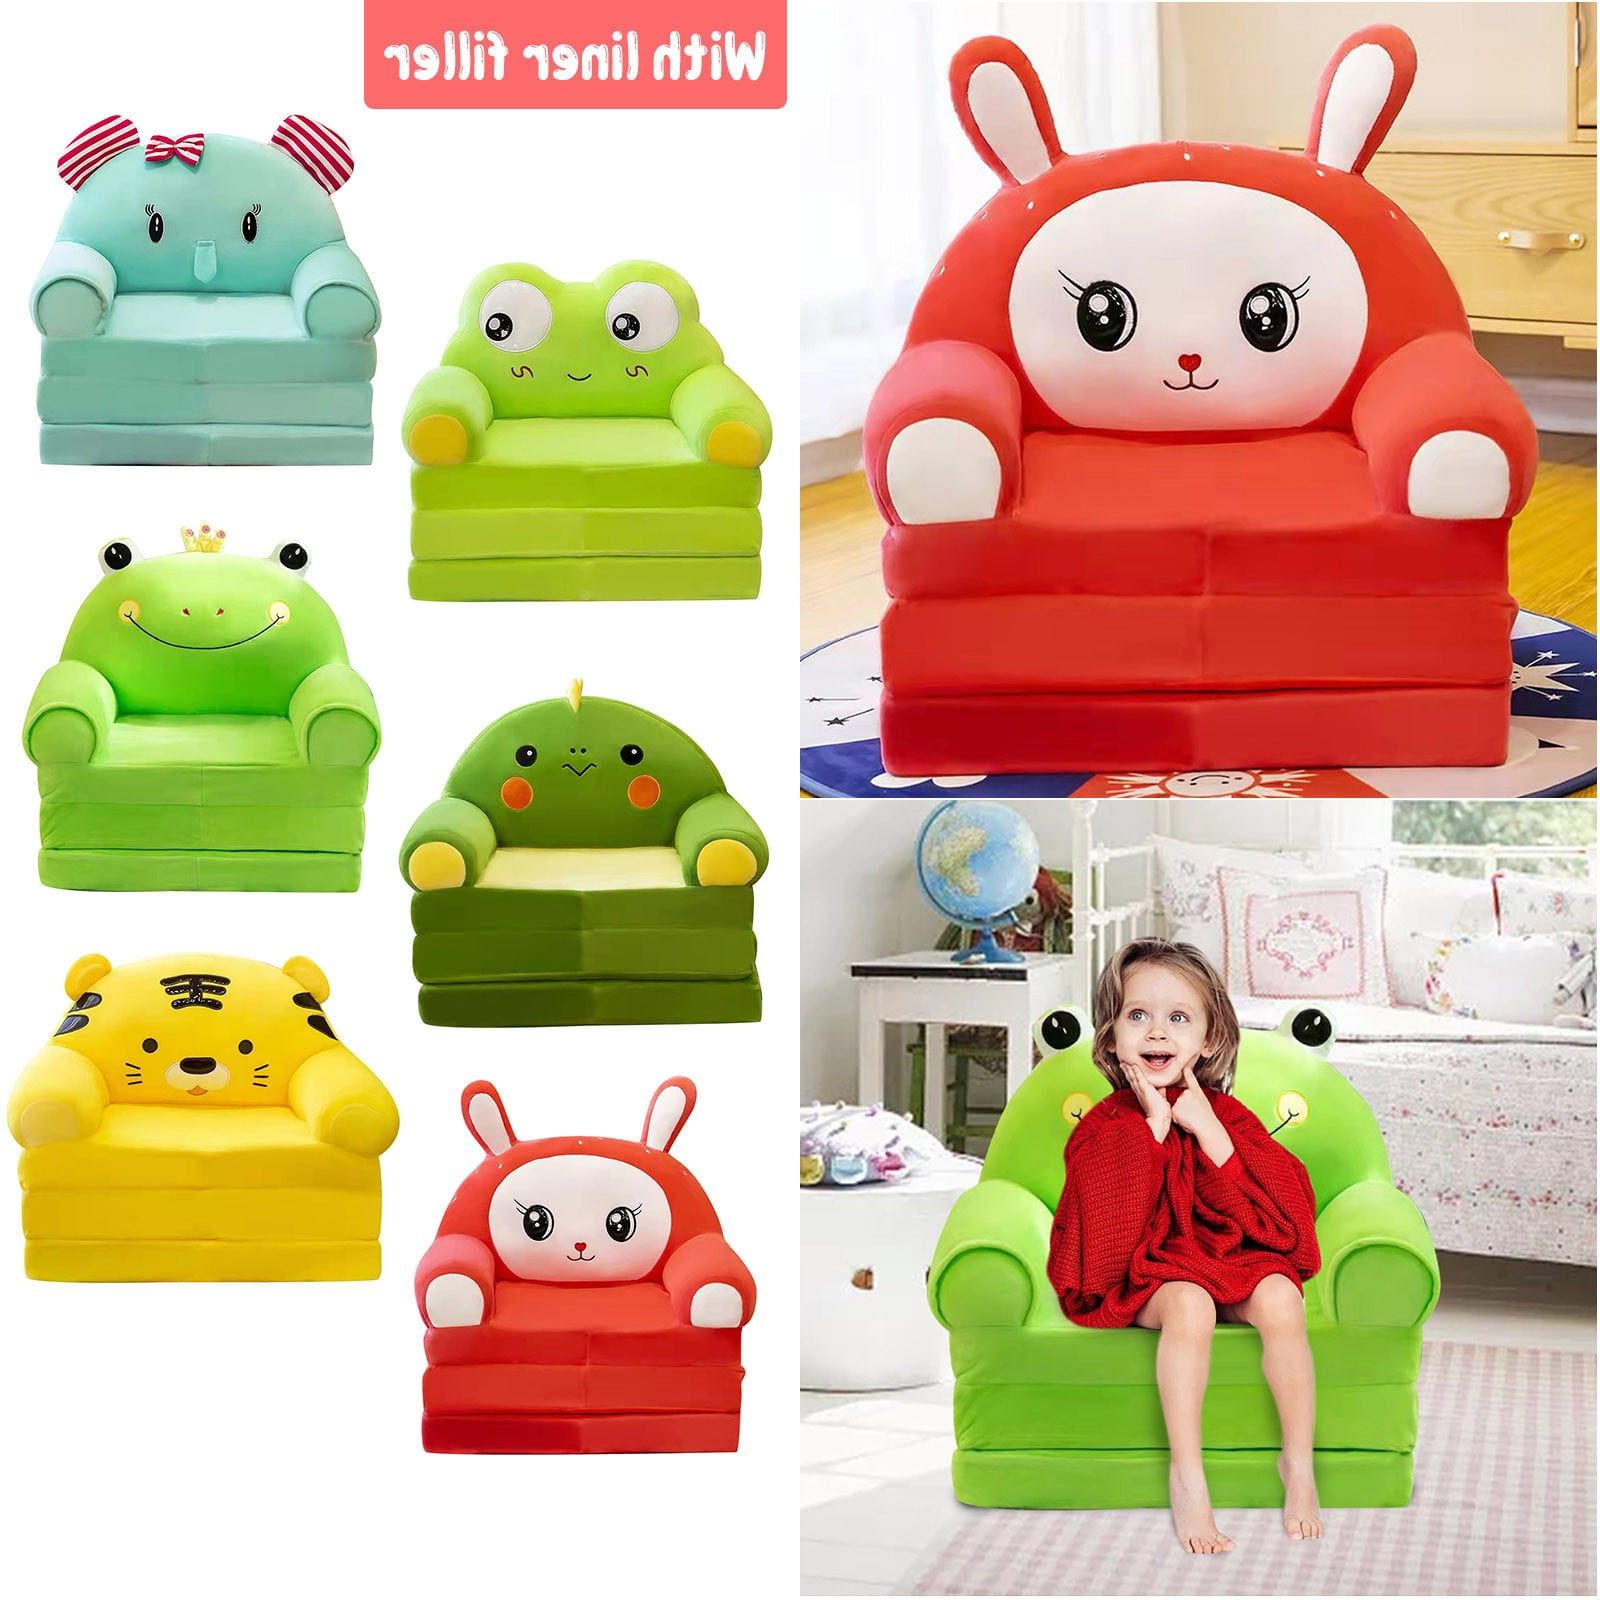 Current 2 In 1 Foldable Children's Sofa Beds Pertaining To Foraging Dimple Plush Foldable Kids Sofa Backrest Armchair 2 In  (View 12 of 15)